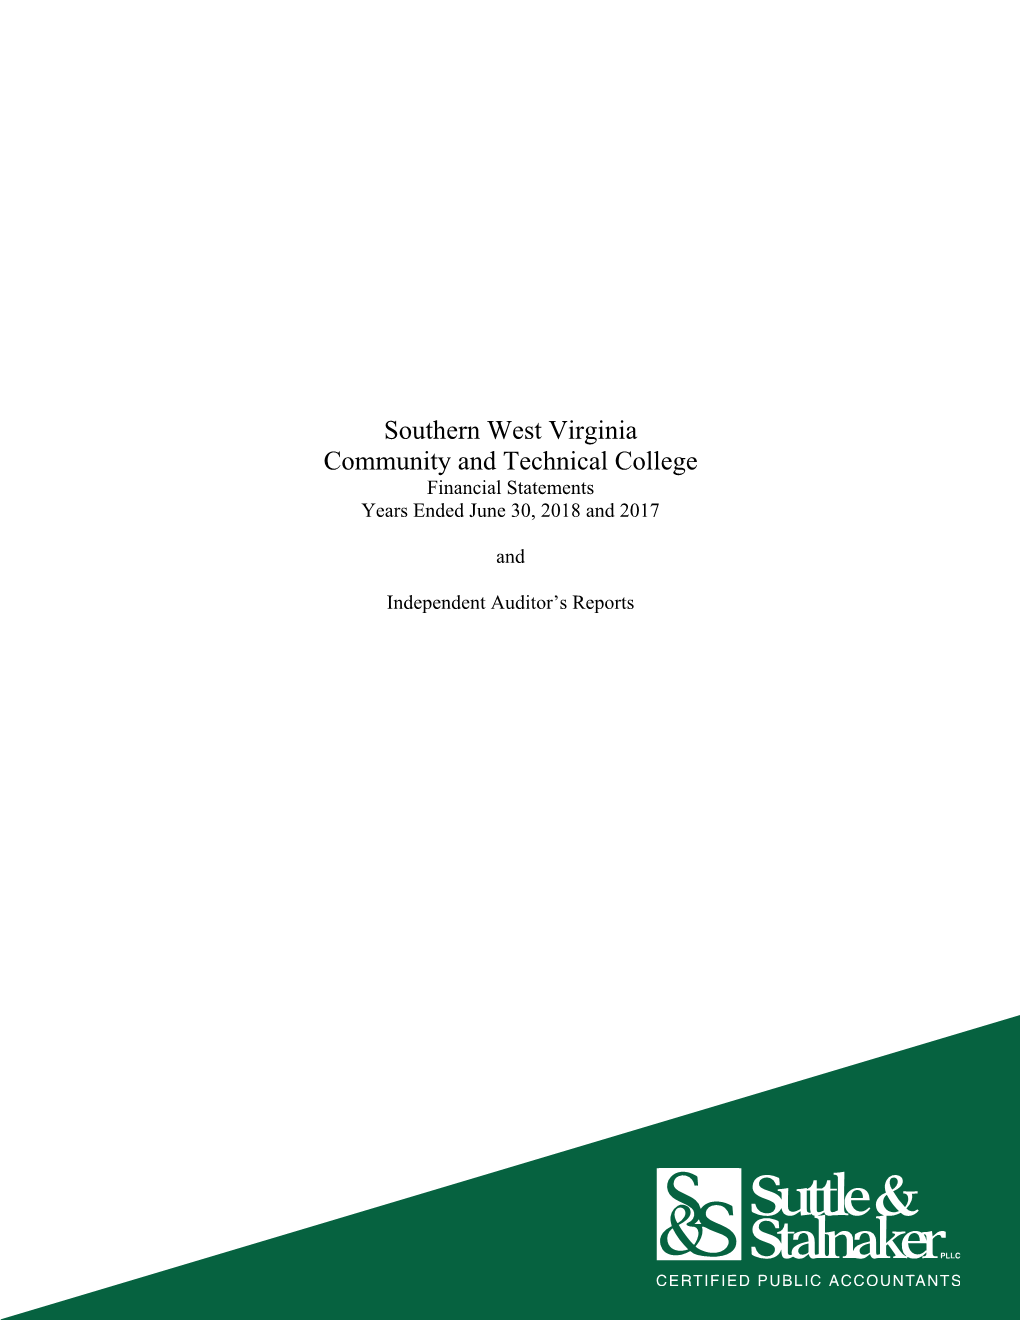 Southern West Virginia Community and Technical College Financial Statements Years Ended June 30, 2018 and 2017